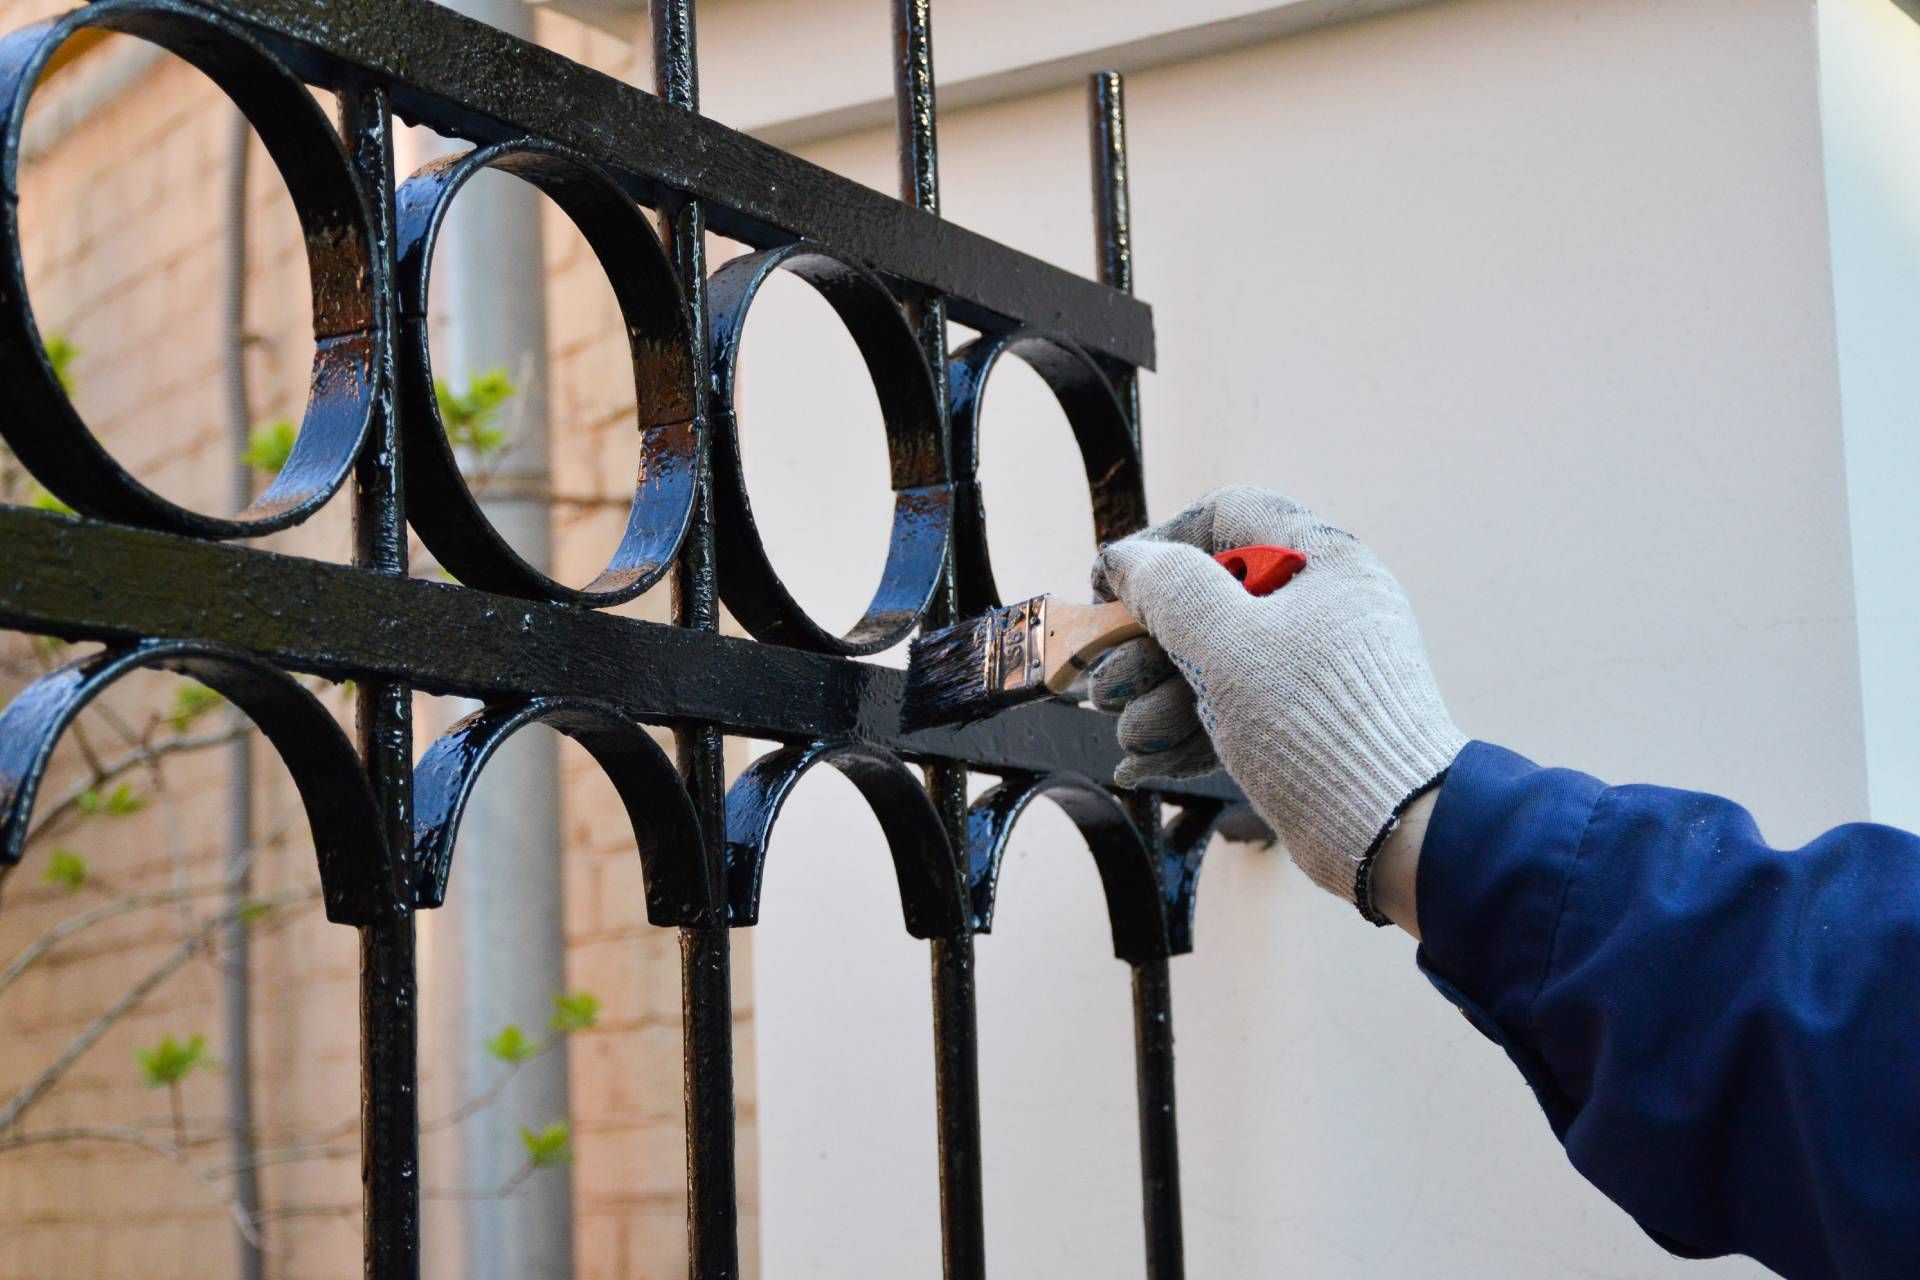 Painting a wrought iron fence near Flint, Grand Blanc, Fenton, Clarkston, Waterford, and Lapeer, Mic